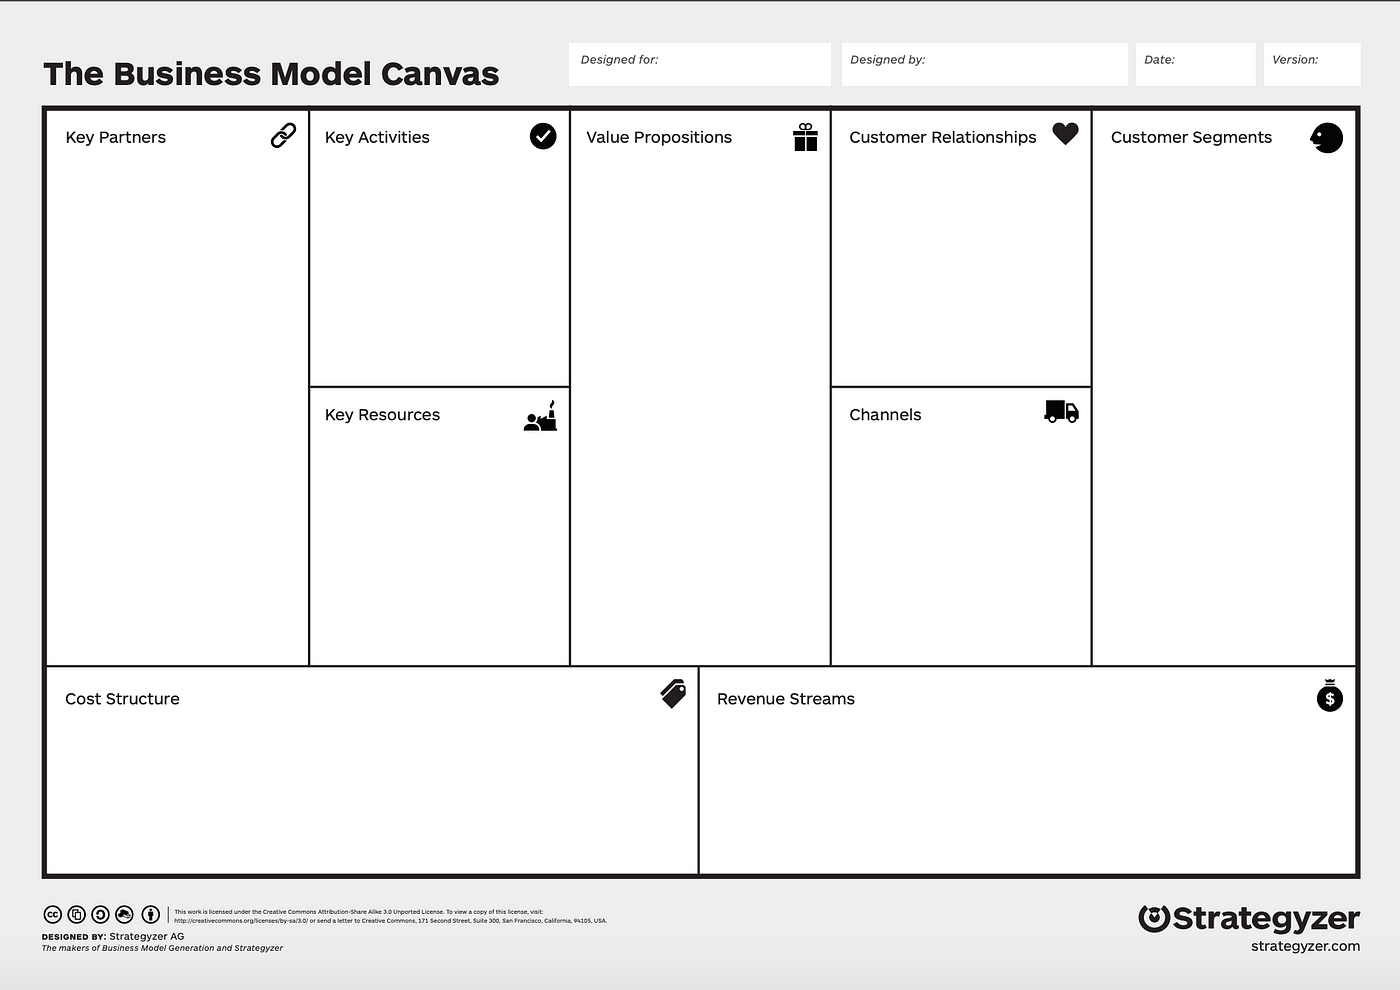 Business Model Canvas Explained — How to Use BMC For Your Next Big Idea |  by Walid AO | Medium